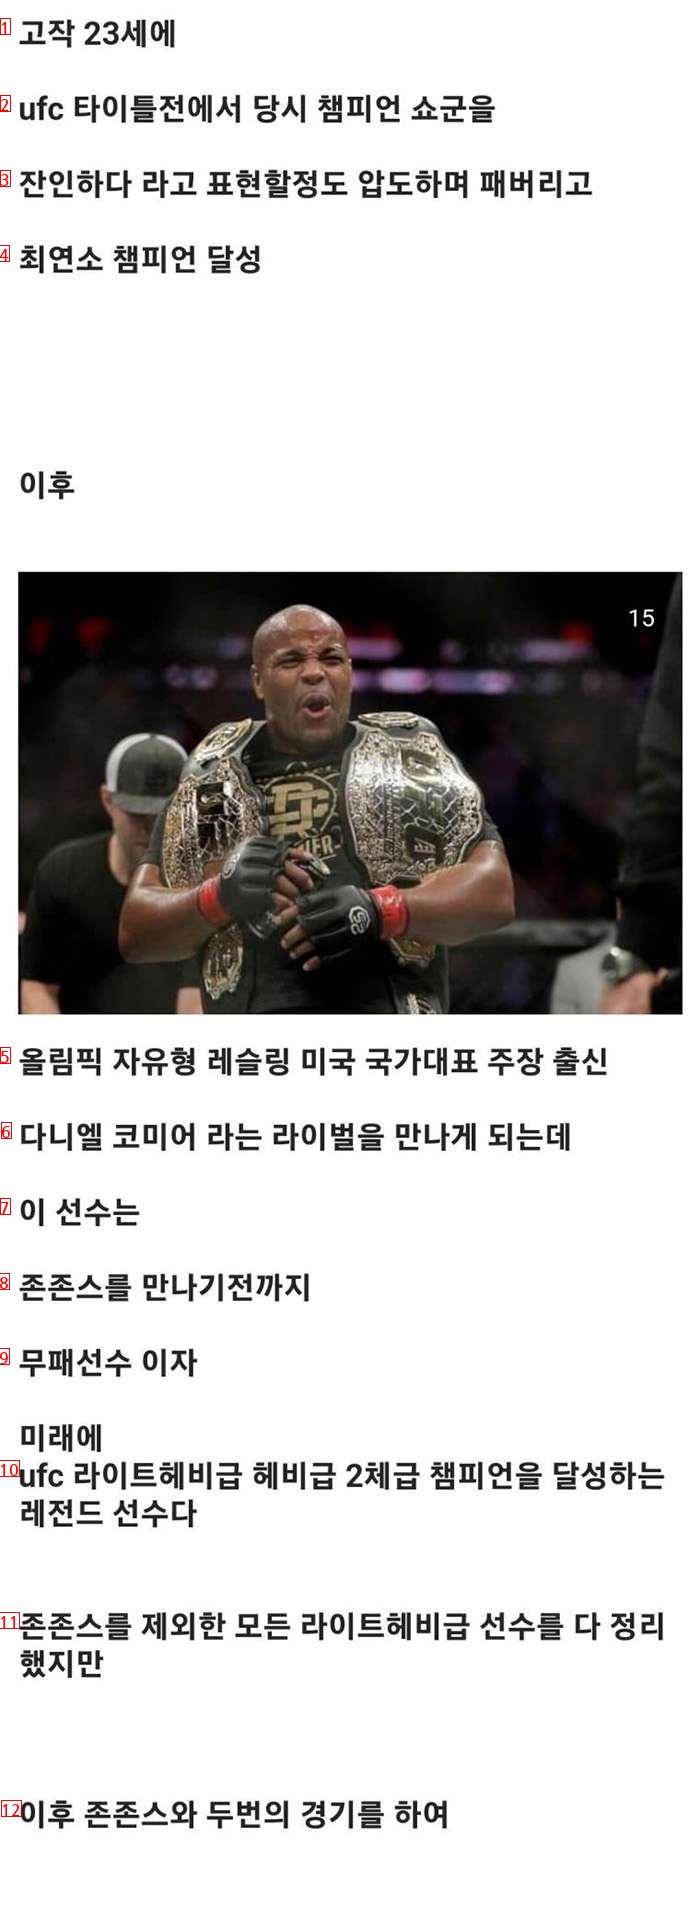 the best player in mixed martial arts history